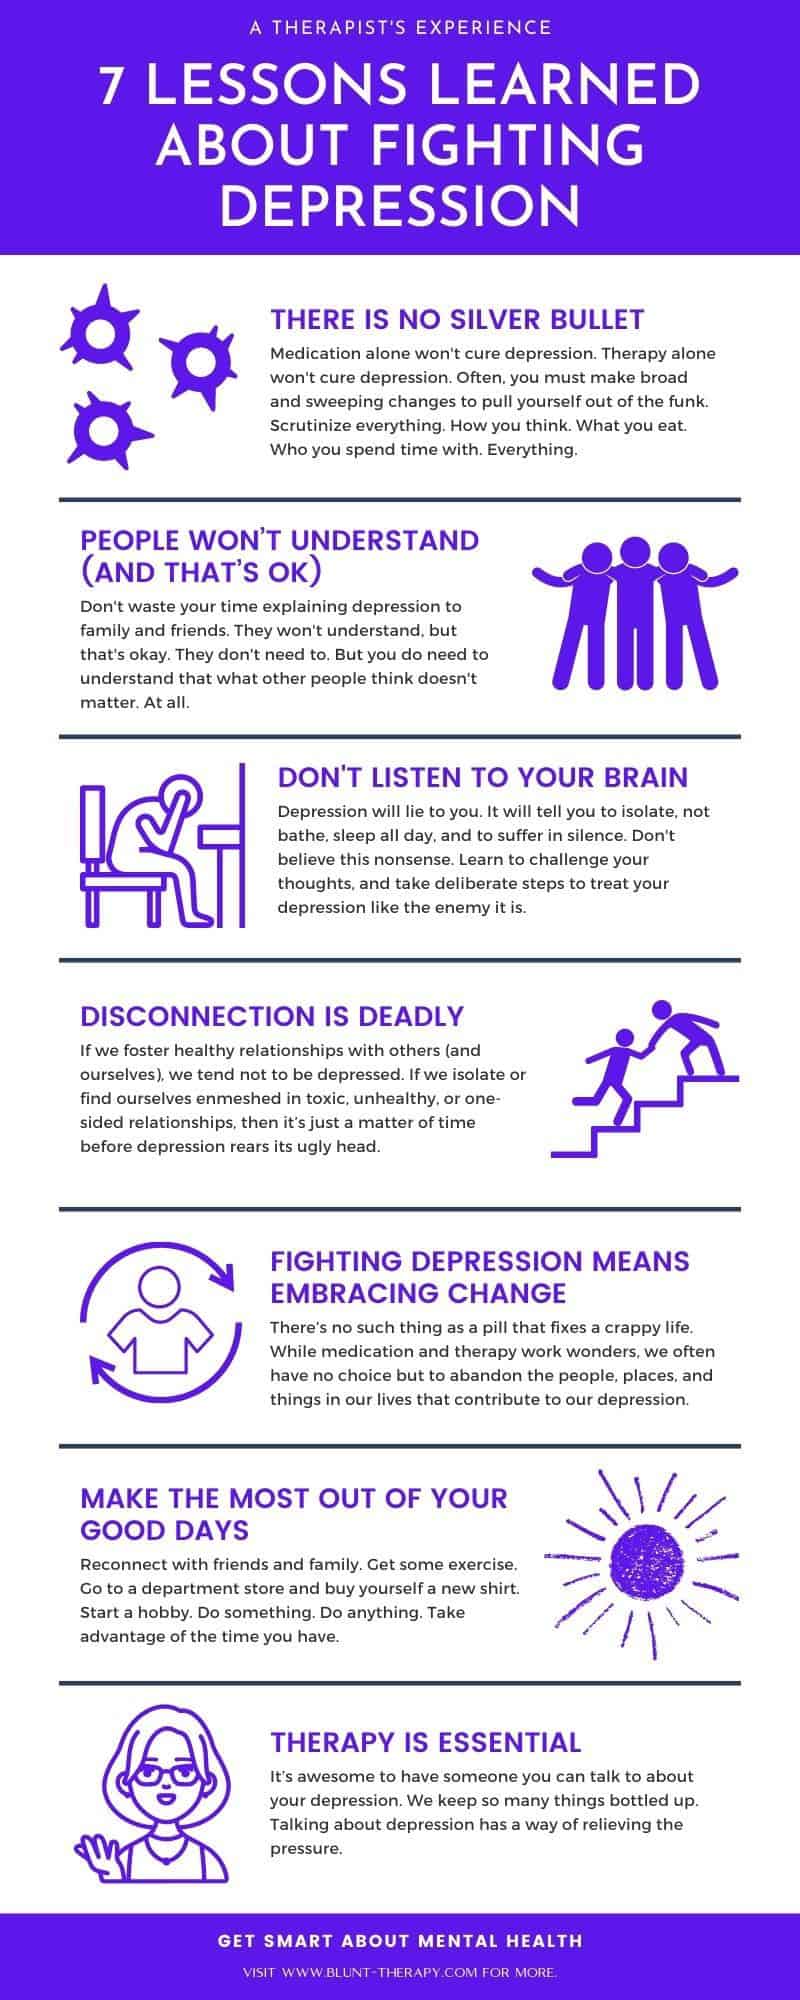 7 lessons learned about fighting depression